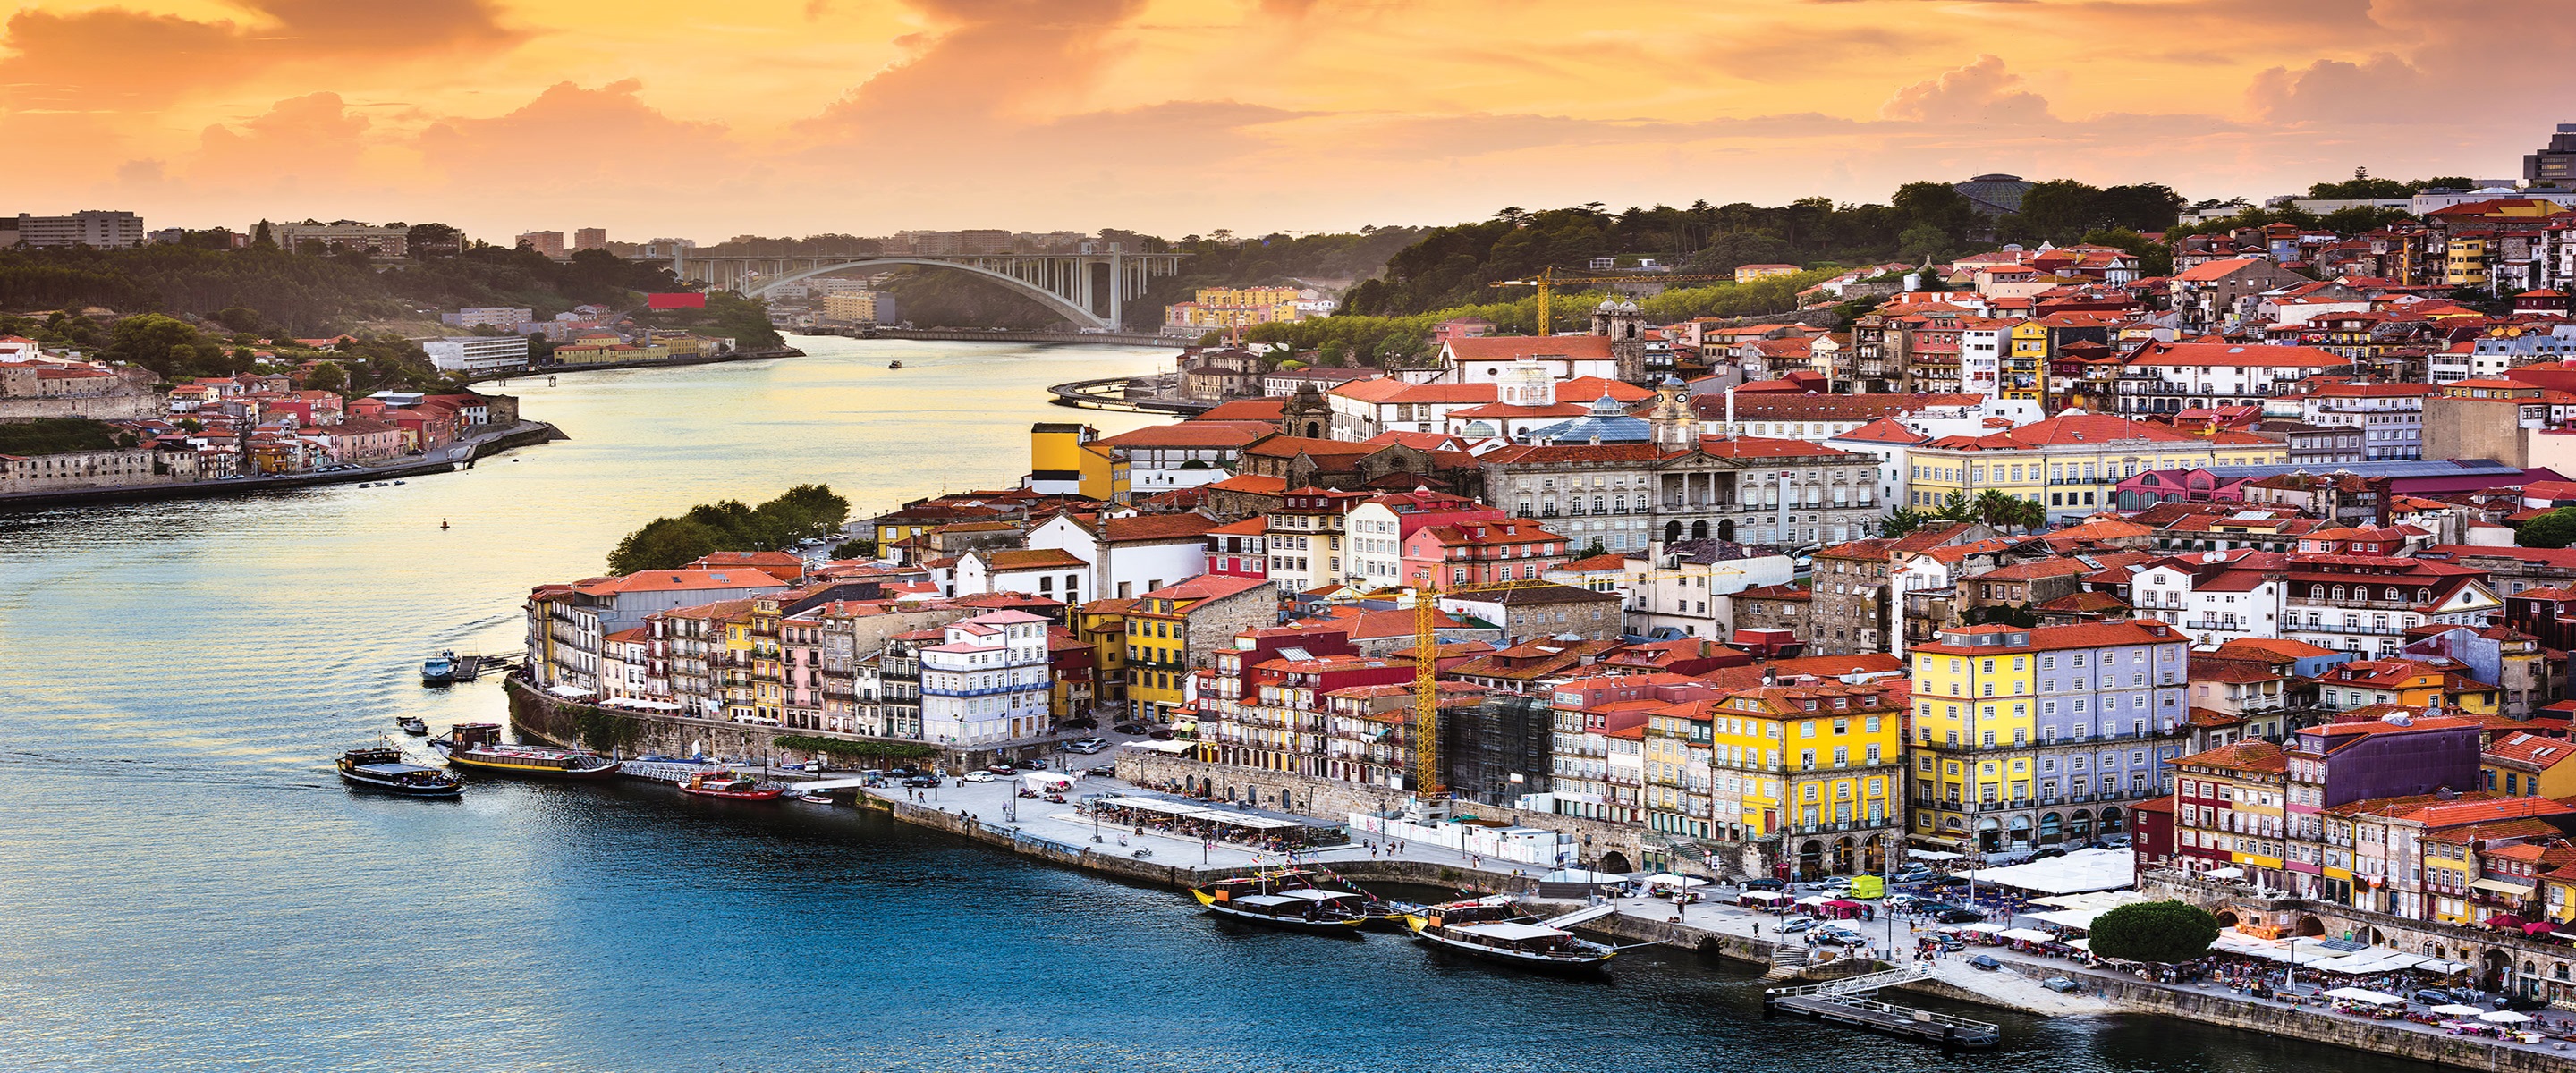 Spain & Portugal Vacation Package & Cruise Tauck